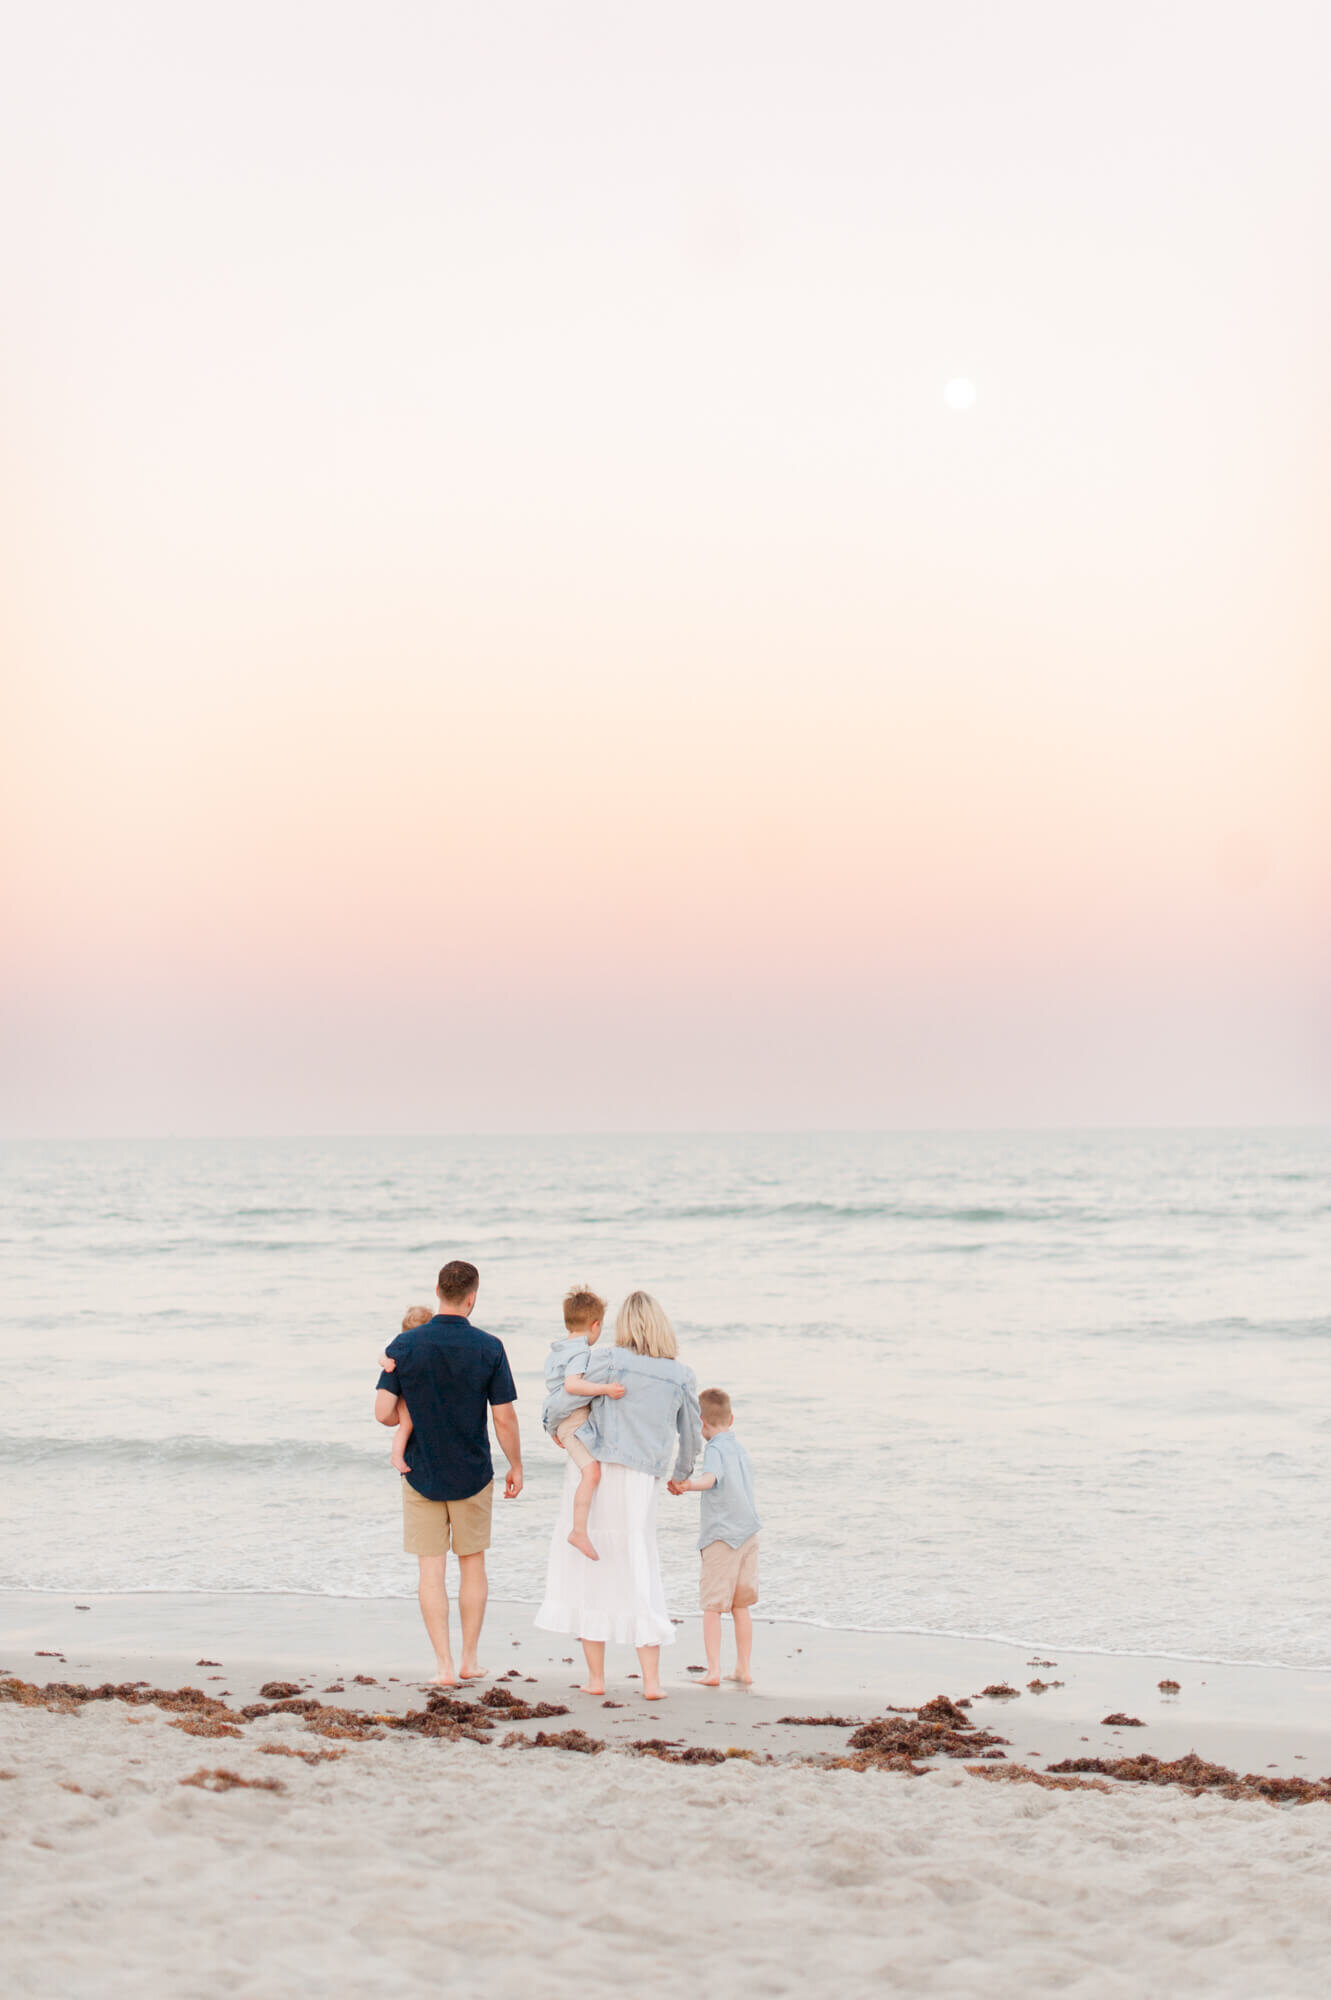 Winter Park family photographer captures a family watching the waves crash at sunset